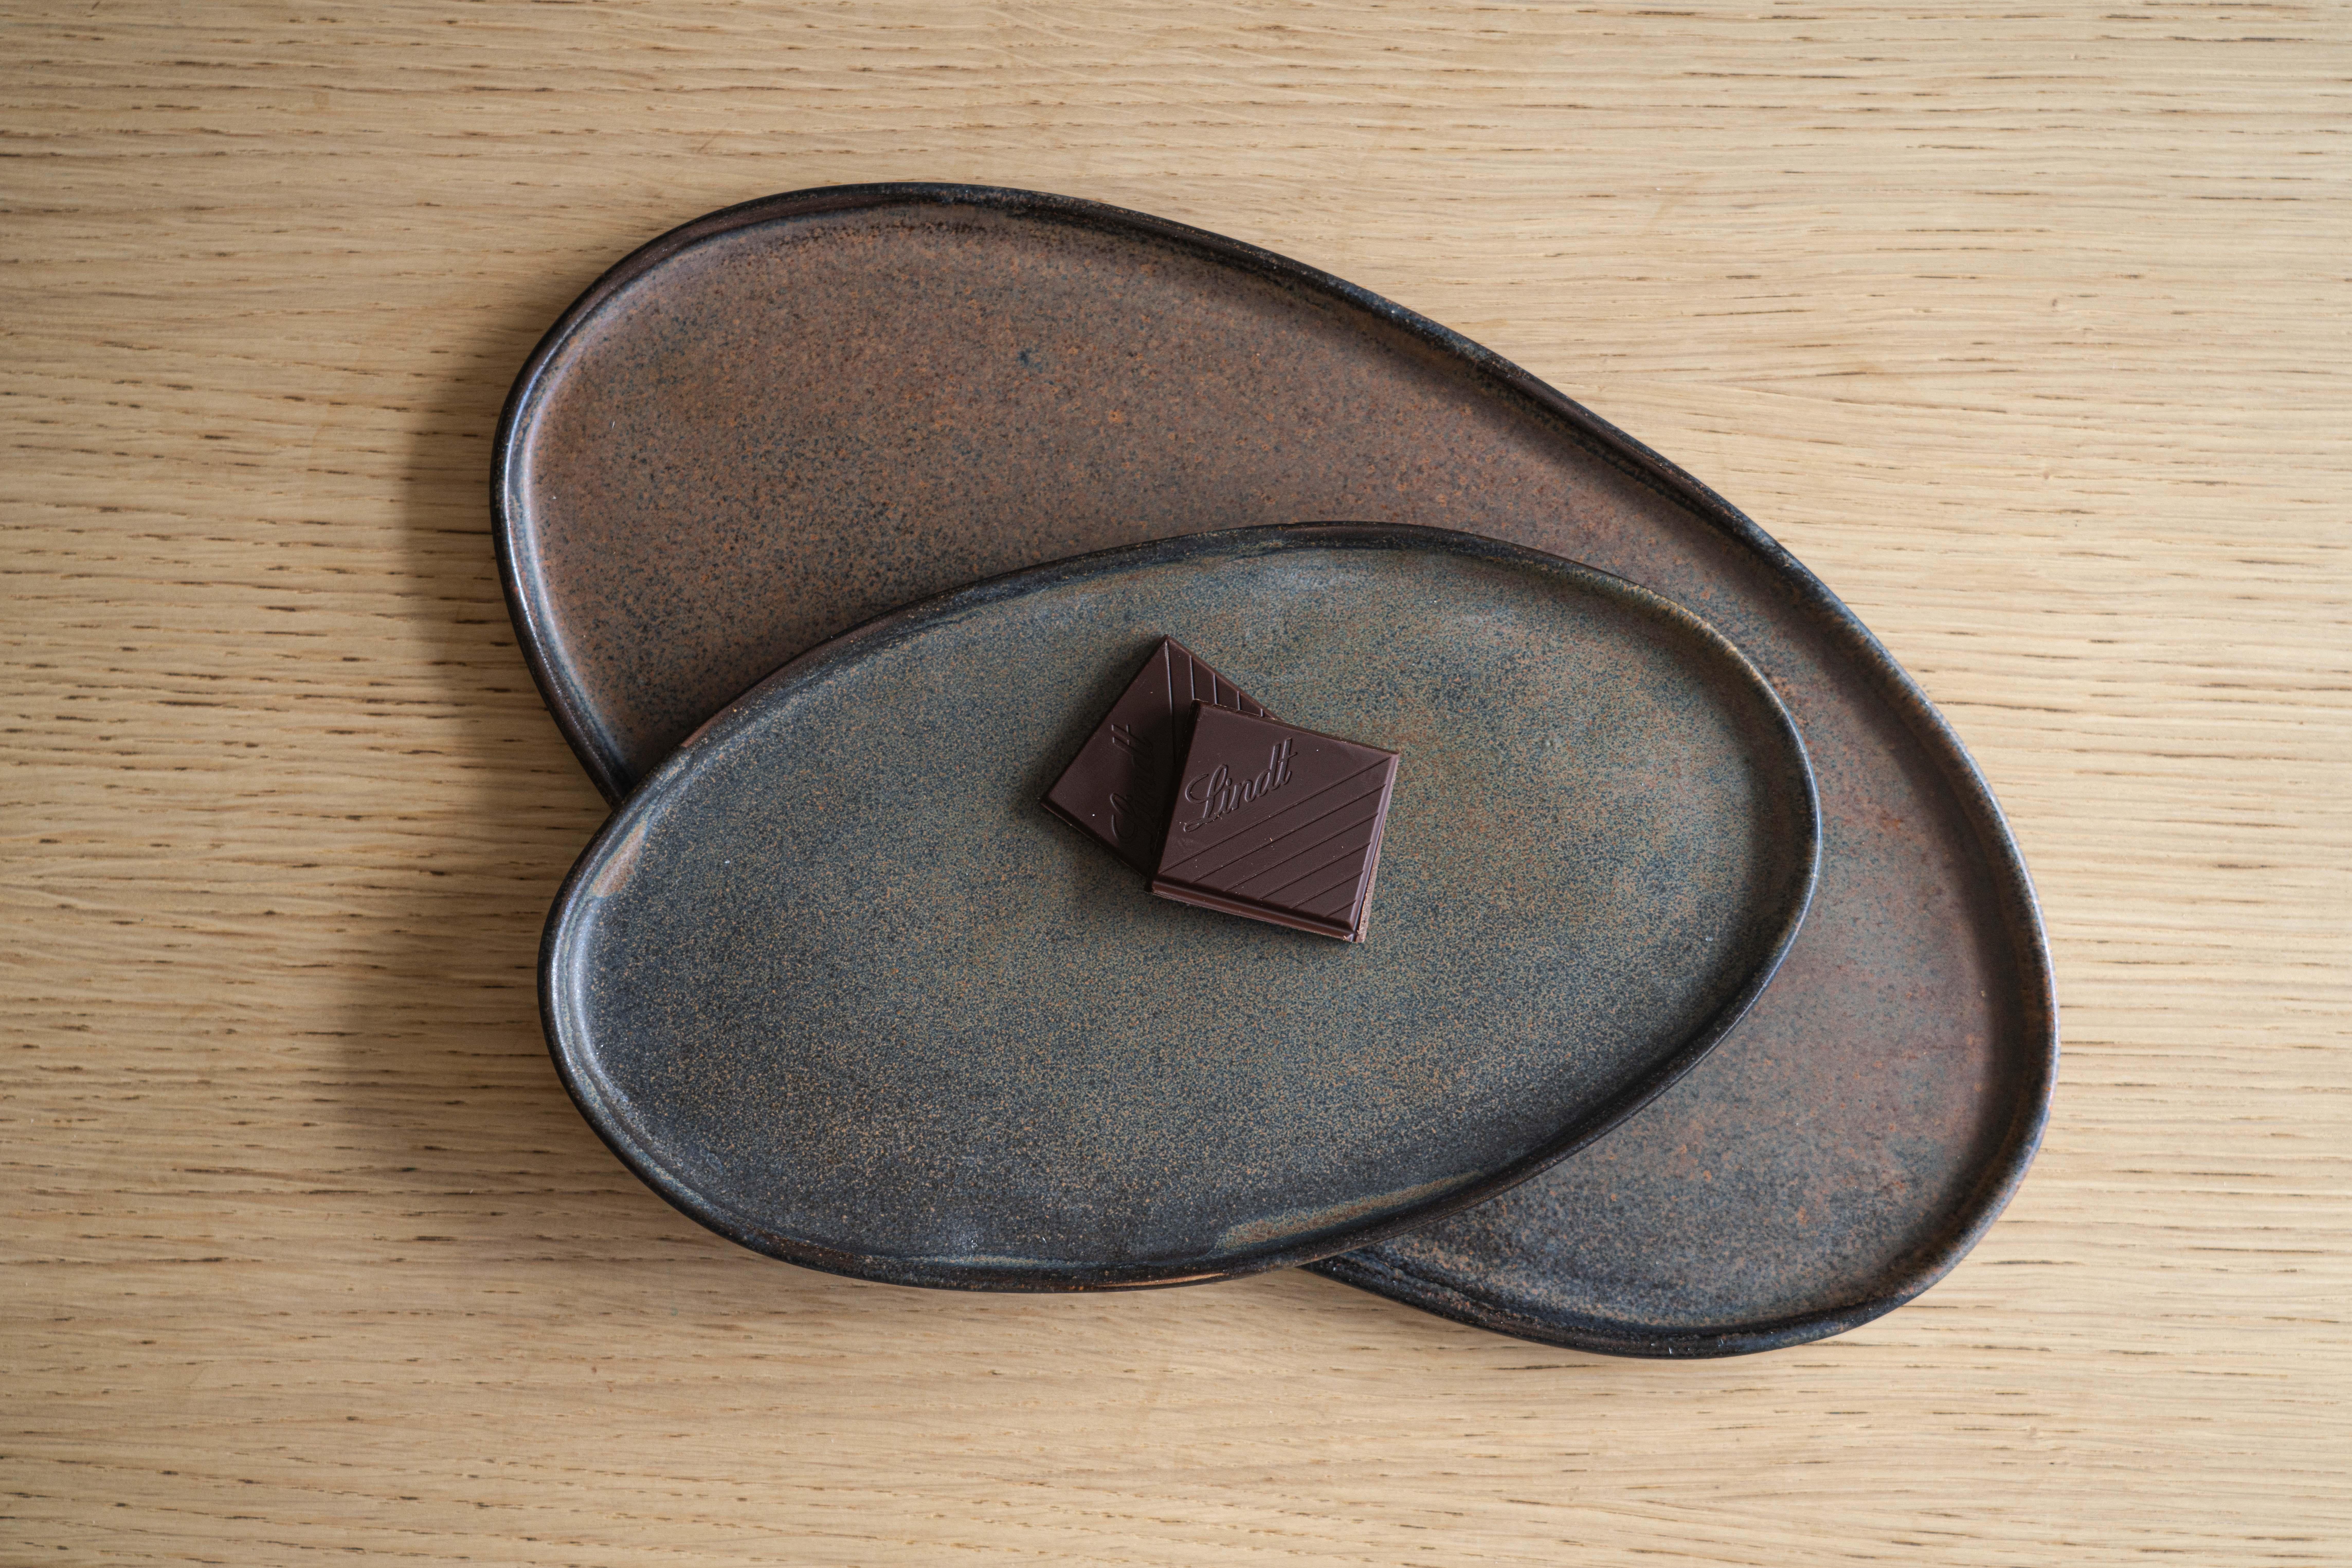 A handmade stoneware serving platter with organic round edges works perfectly for everyday and special occasions alike. The oval shape of this platter makes it easier to set the table. Hand-dipped in a reactive glaze that swirls uniquely across each